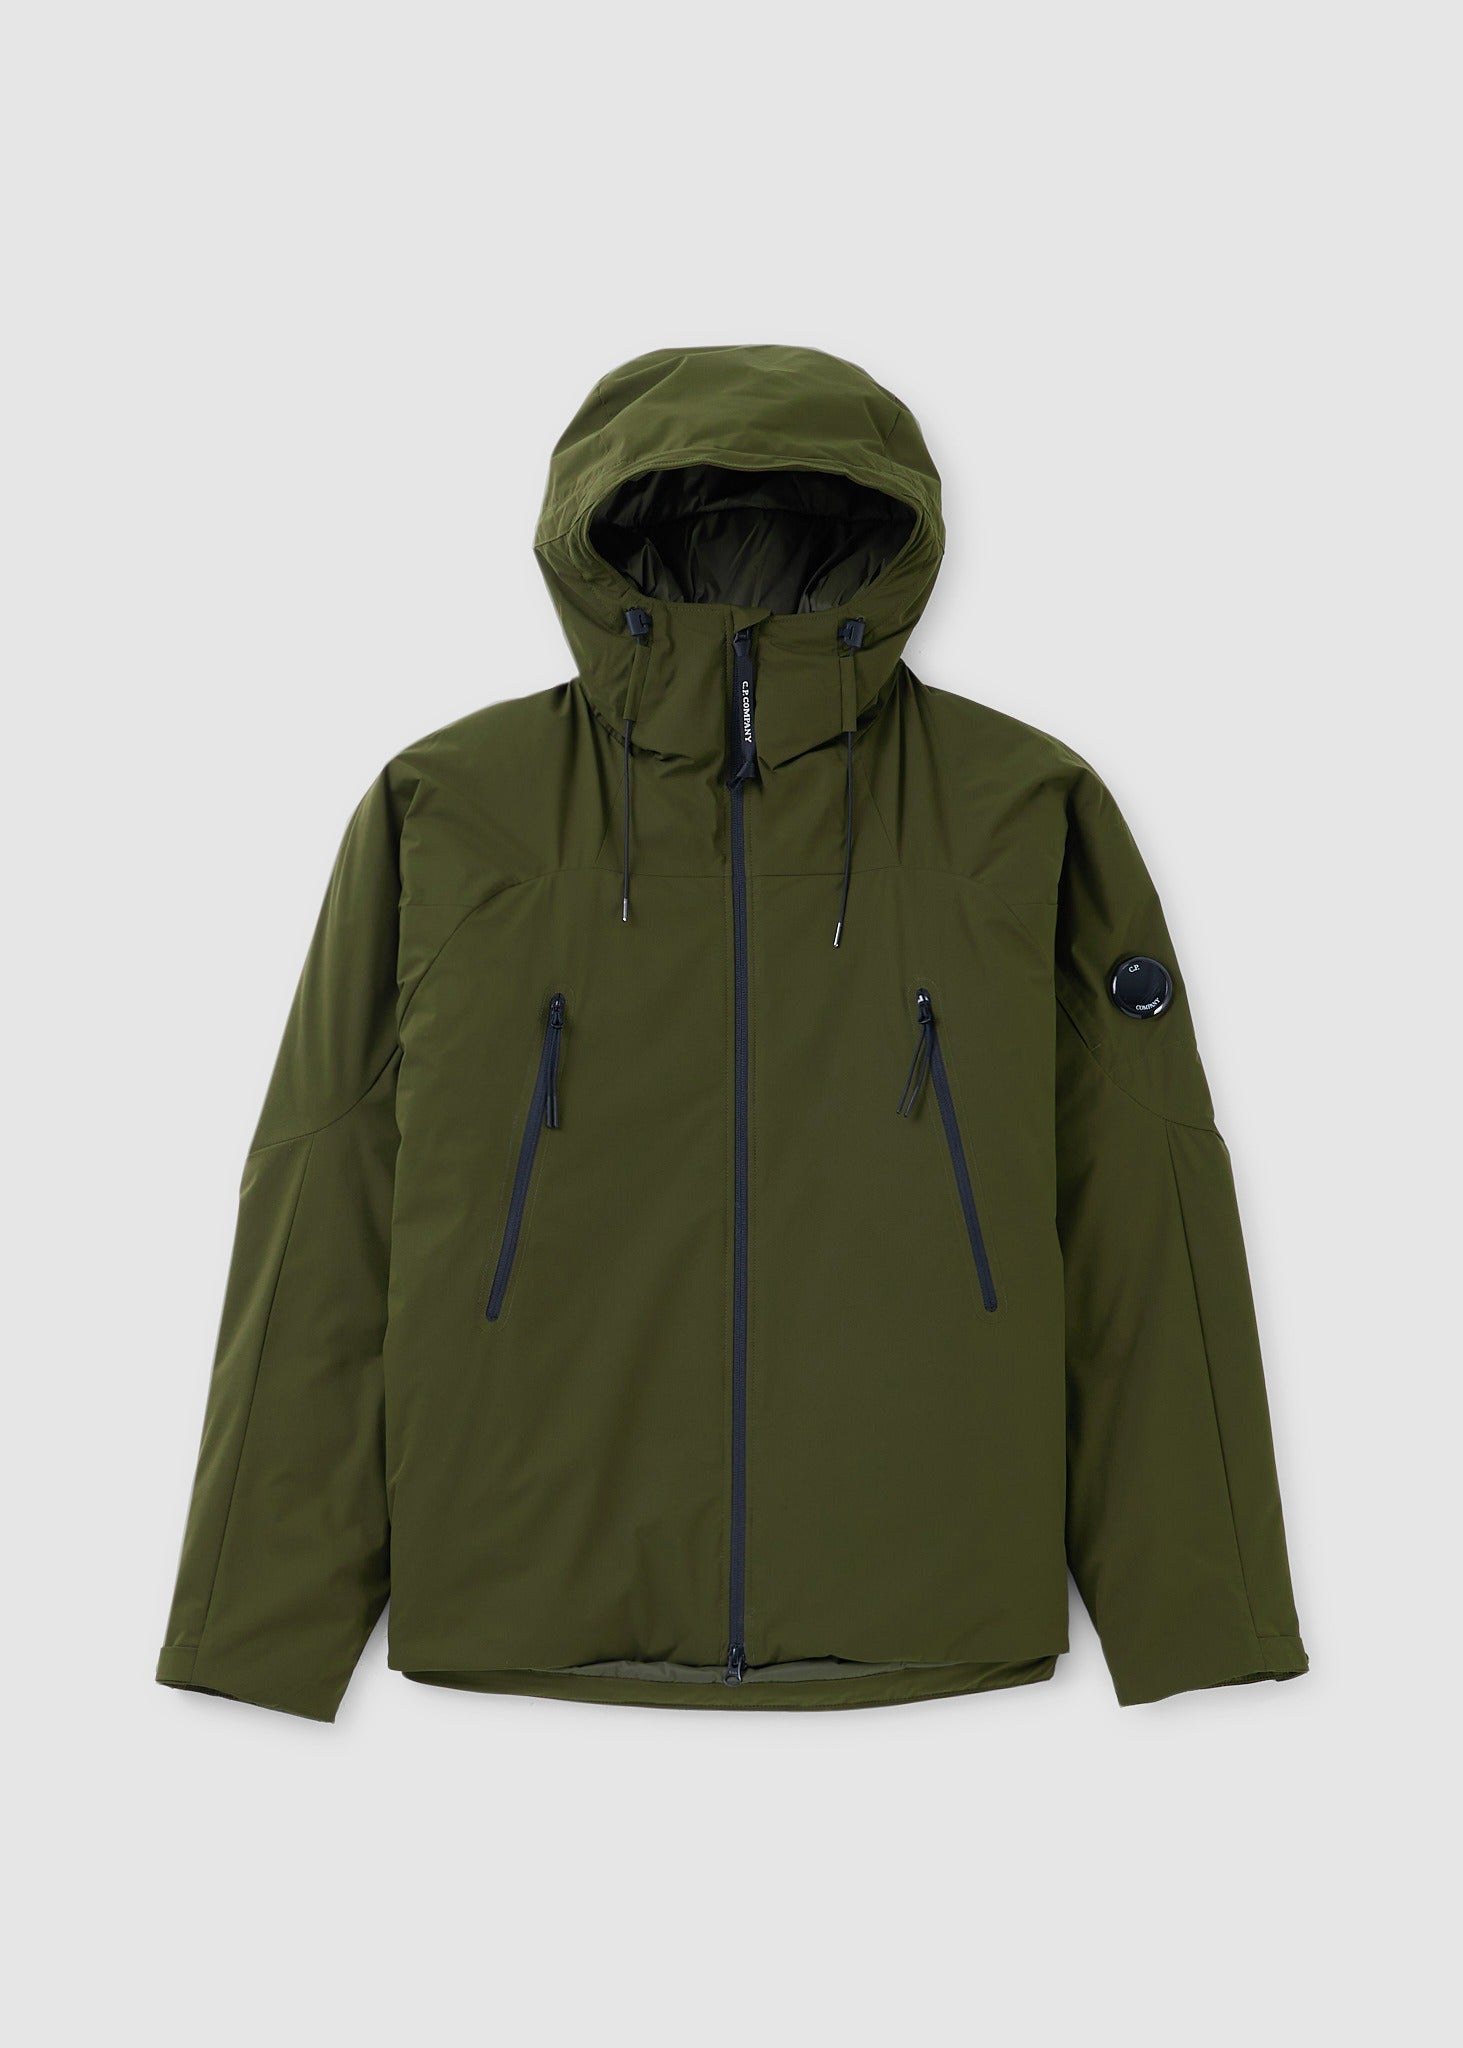 Image of C.P. Company Mens Pro-Tek Hooded Jacket In Ivy Green